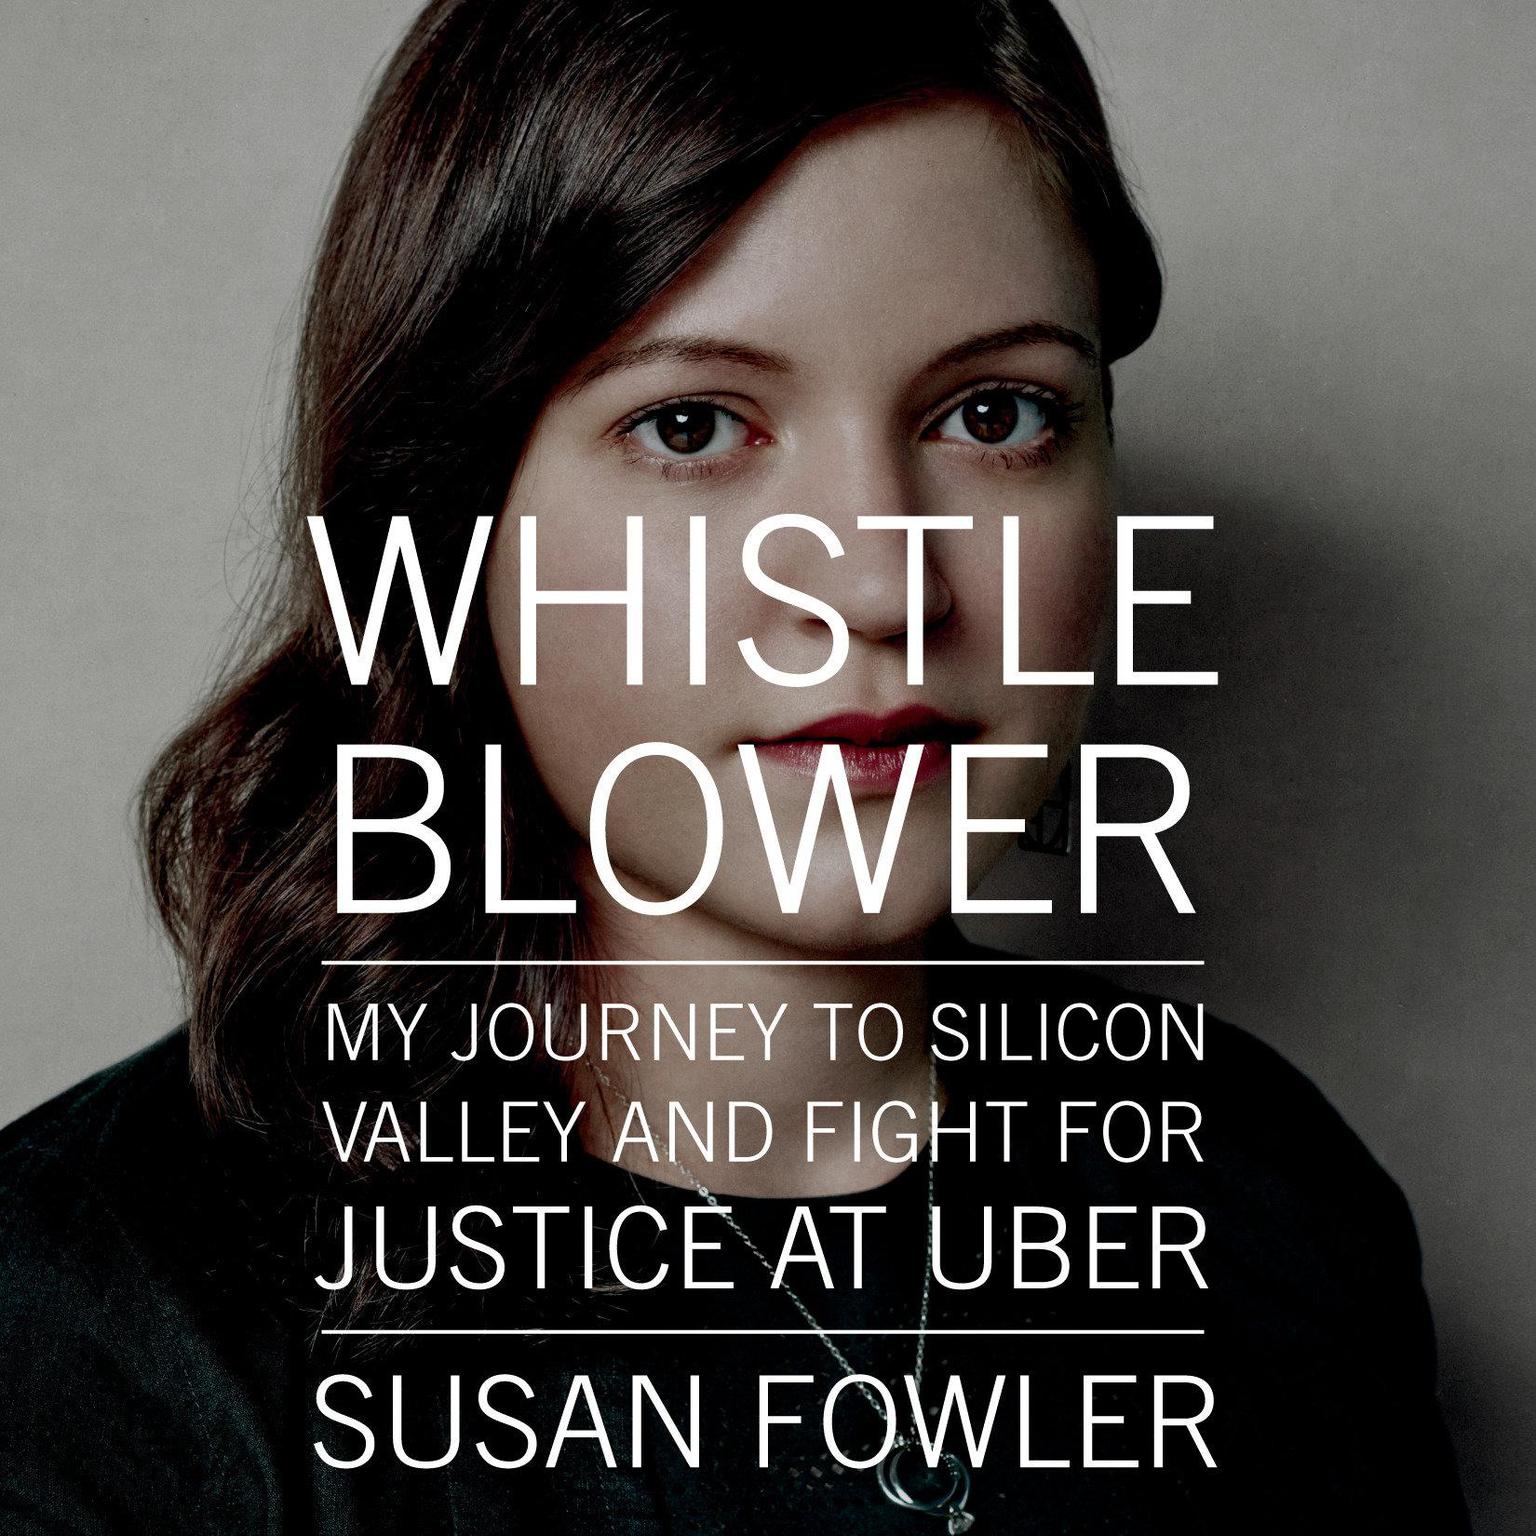 Whistleblower: My Journey to Silicon Valley and Fight for Justice at Uber Audiobook, by Susan Fowler